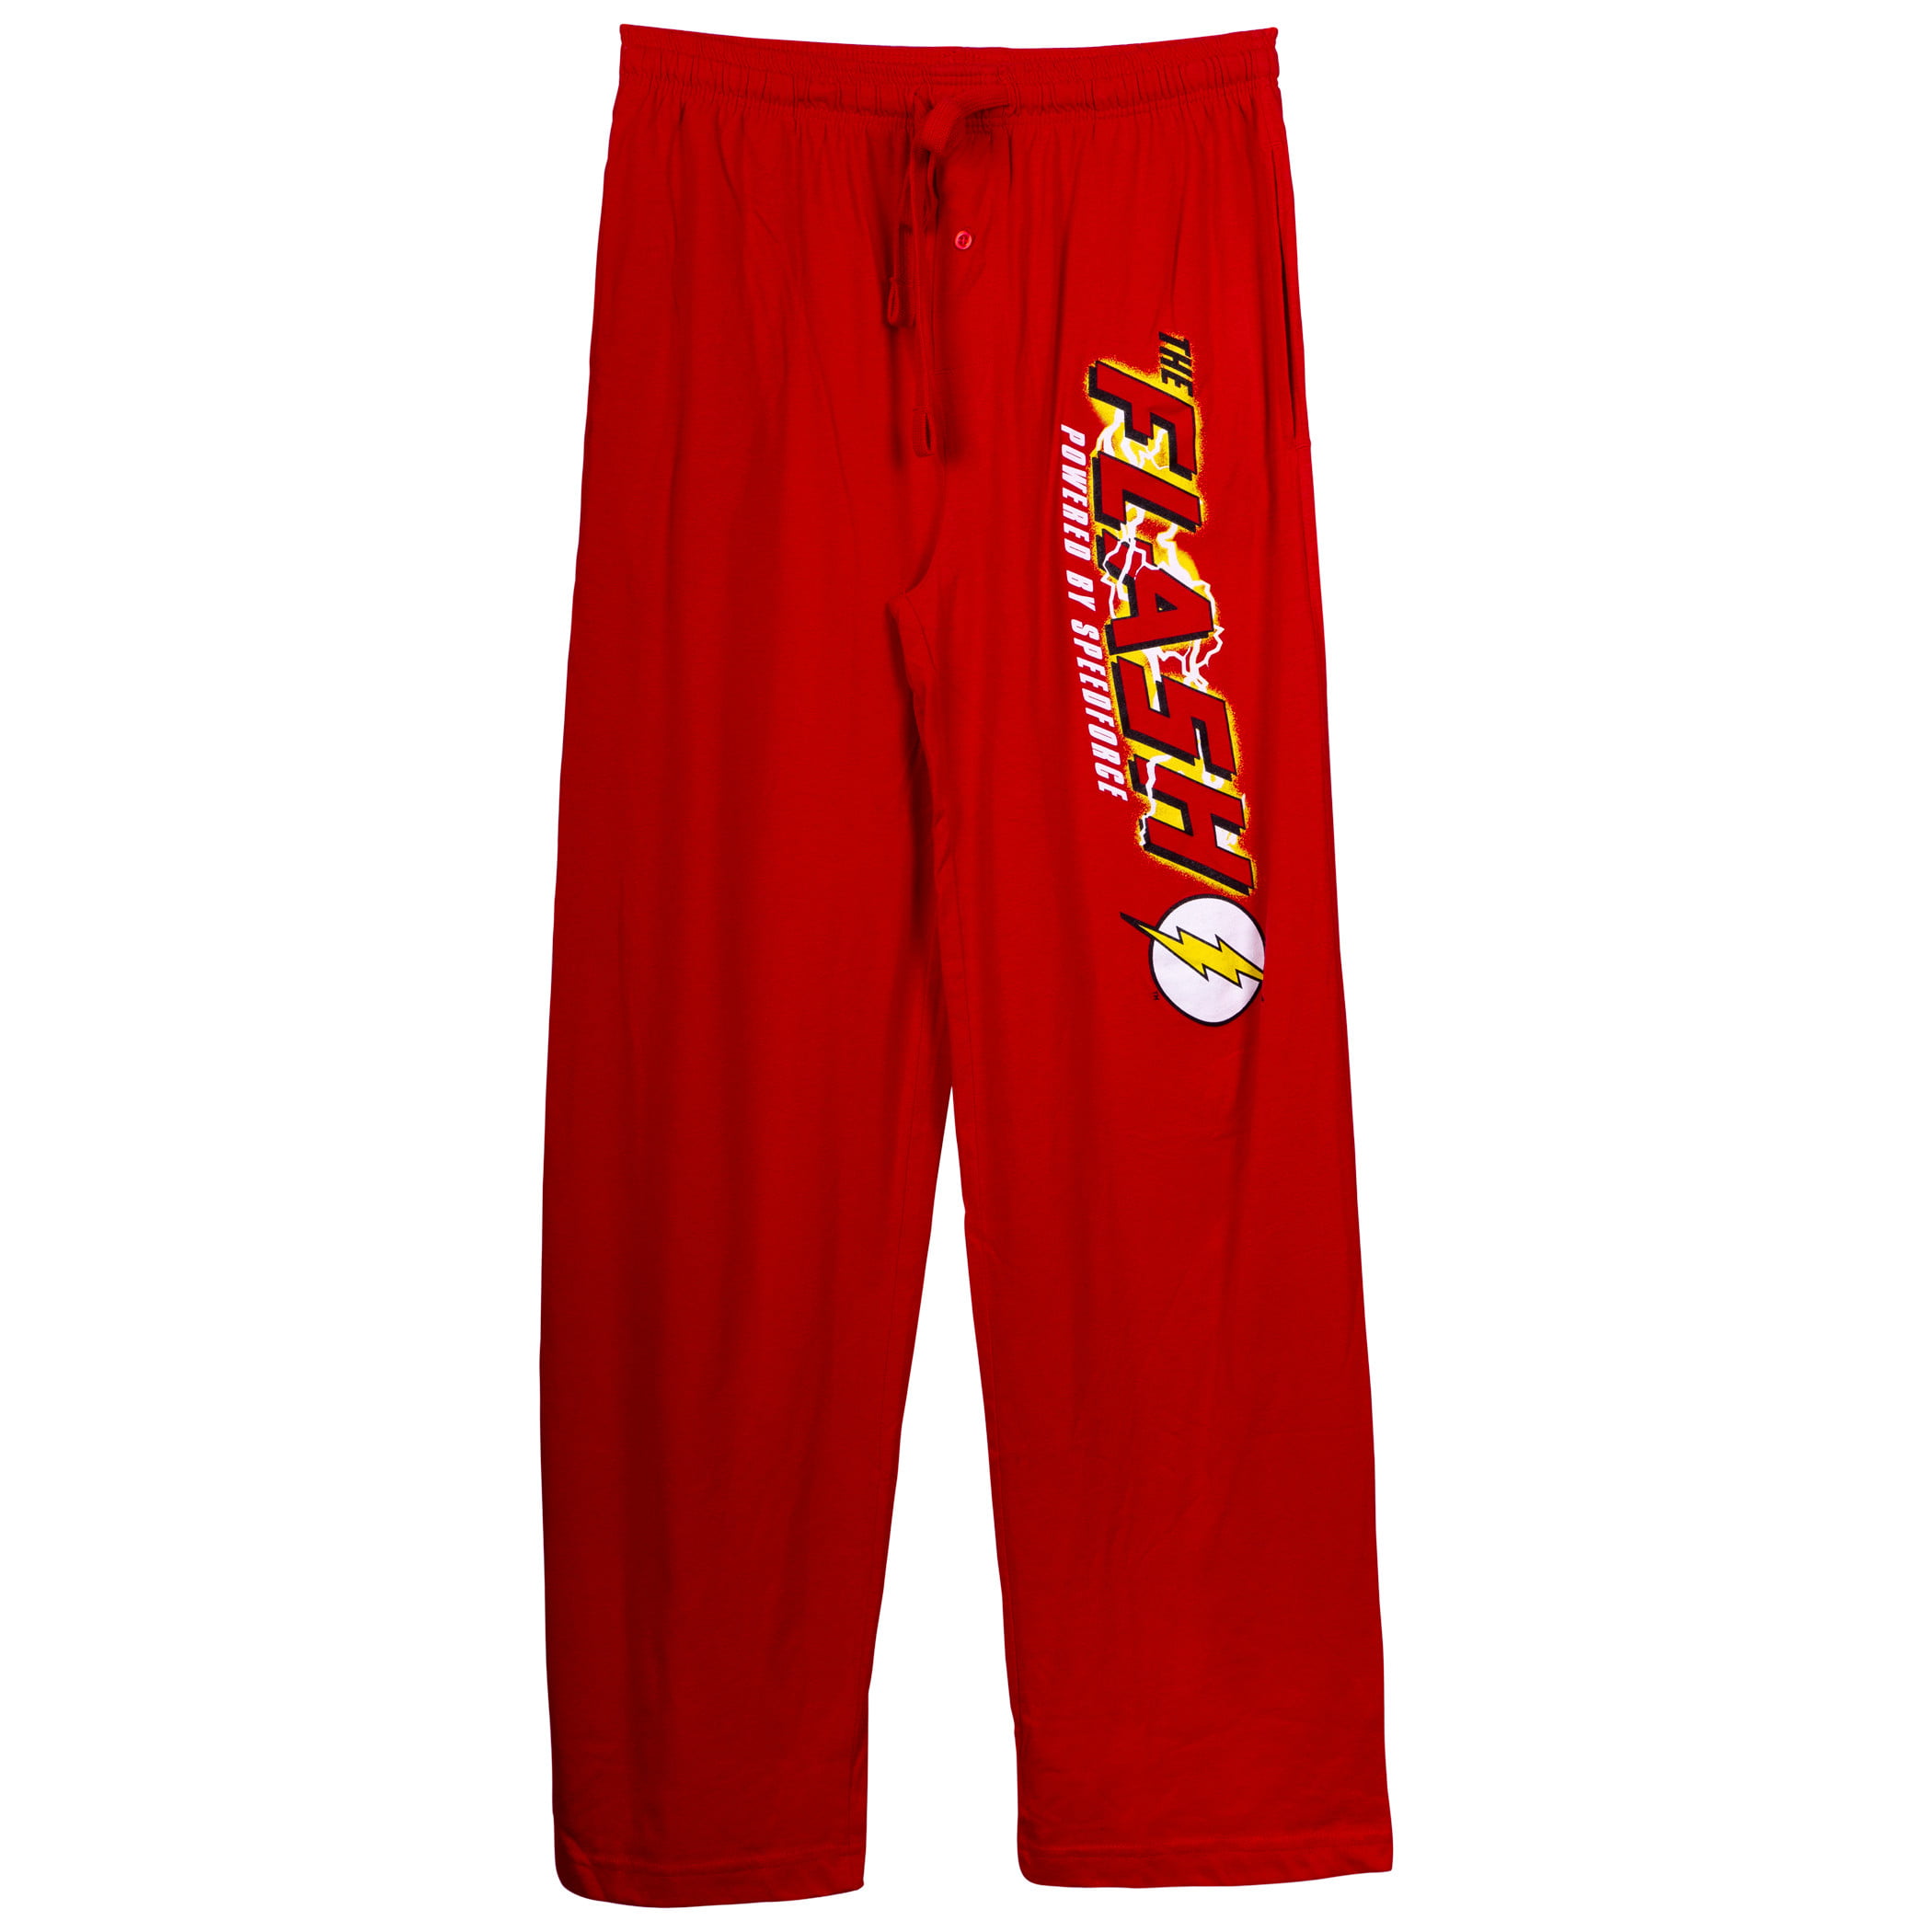 Speed Force Unisex Red Pants-XSmall -